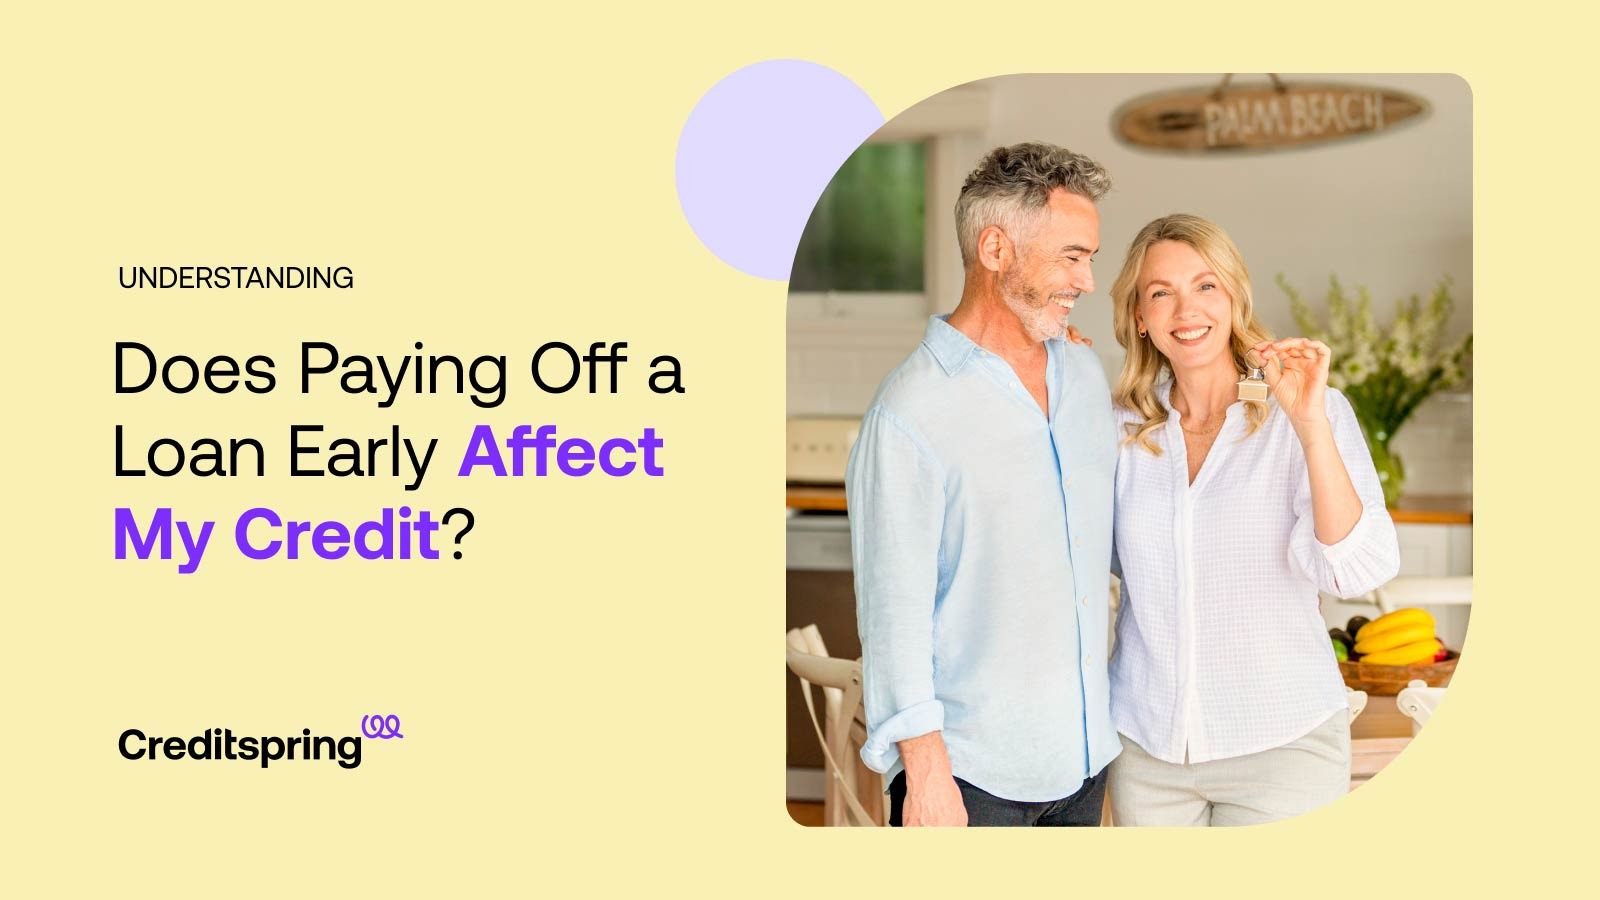 does paying off a loan early affect my credit?